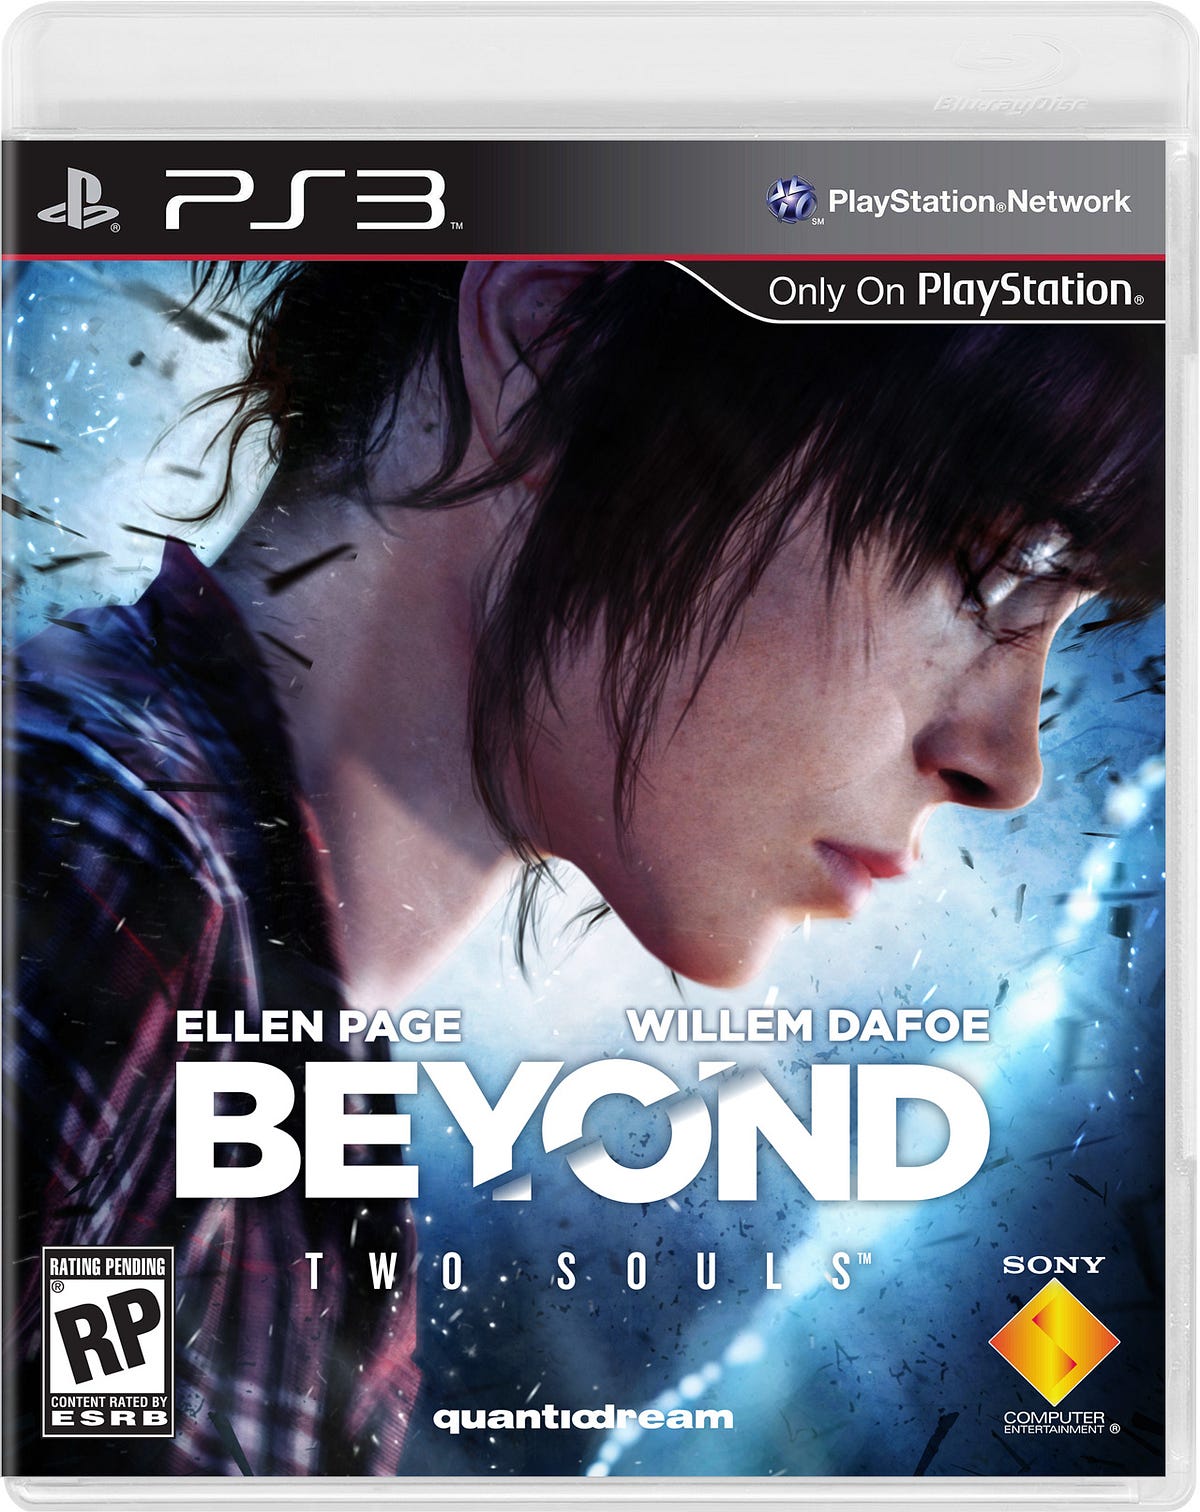 Beyond Two Souls. Metacritic: 70, by Drew Credico